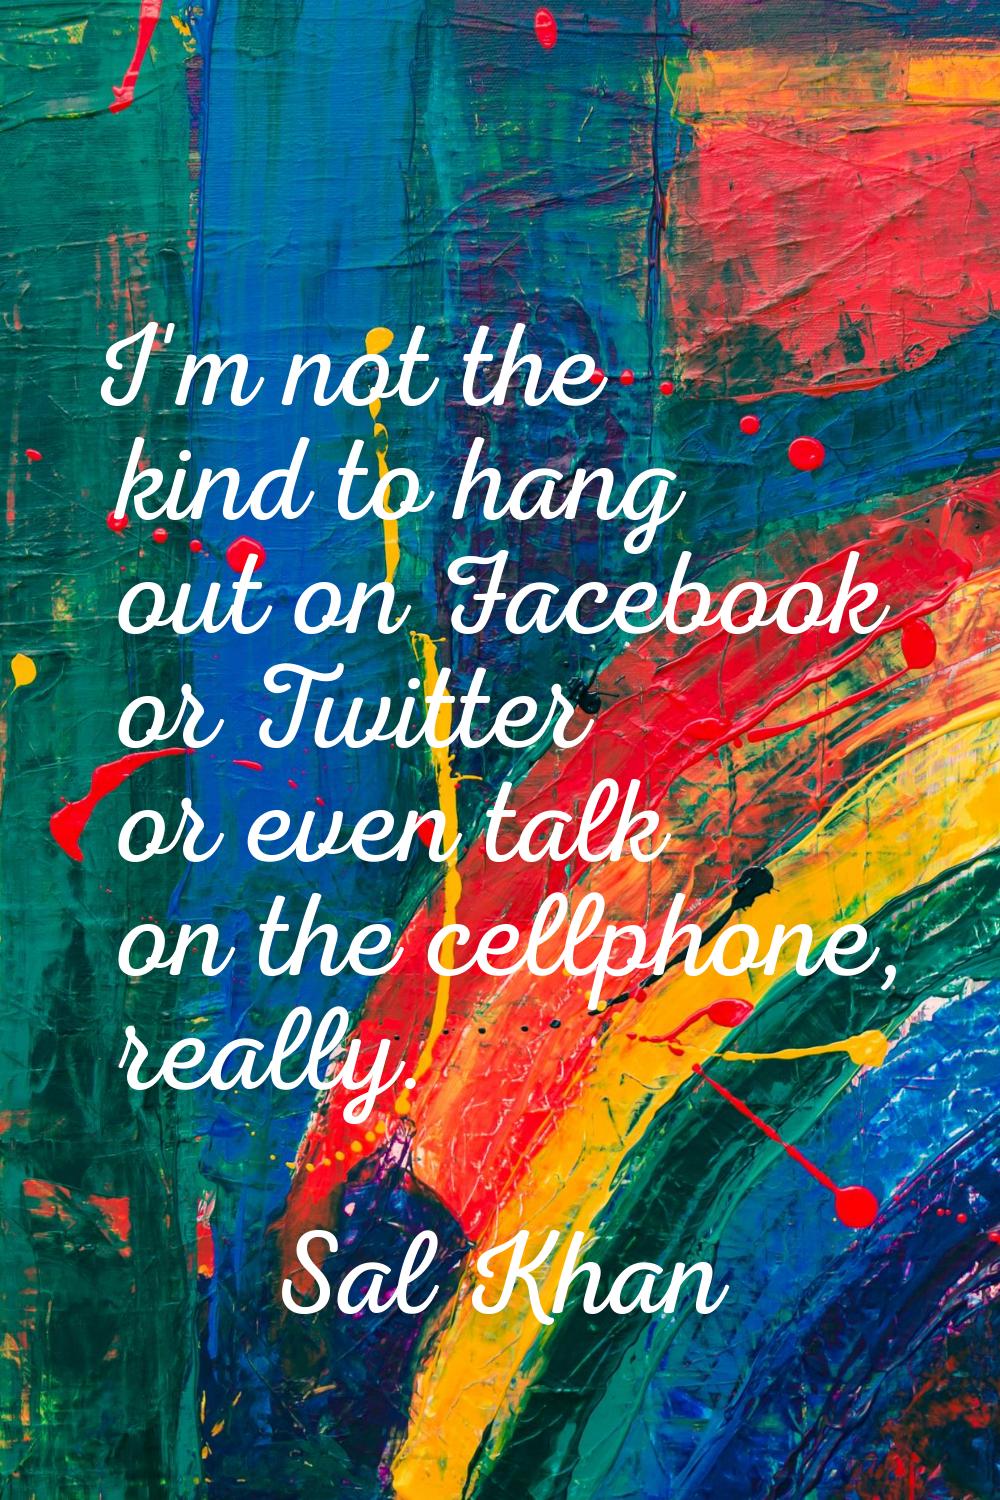 I'm not the kind to hang out on Facebook or Twitter or even talk on the cellphone, really.